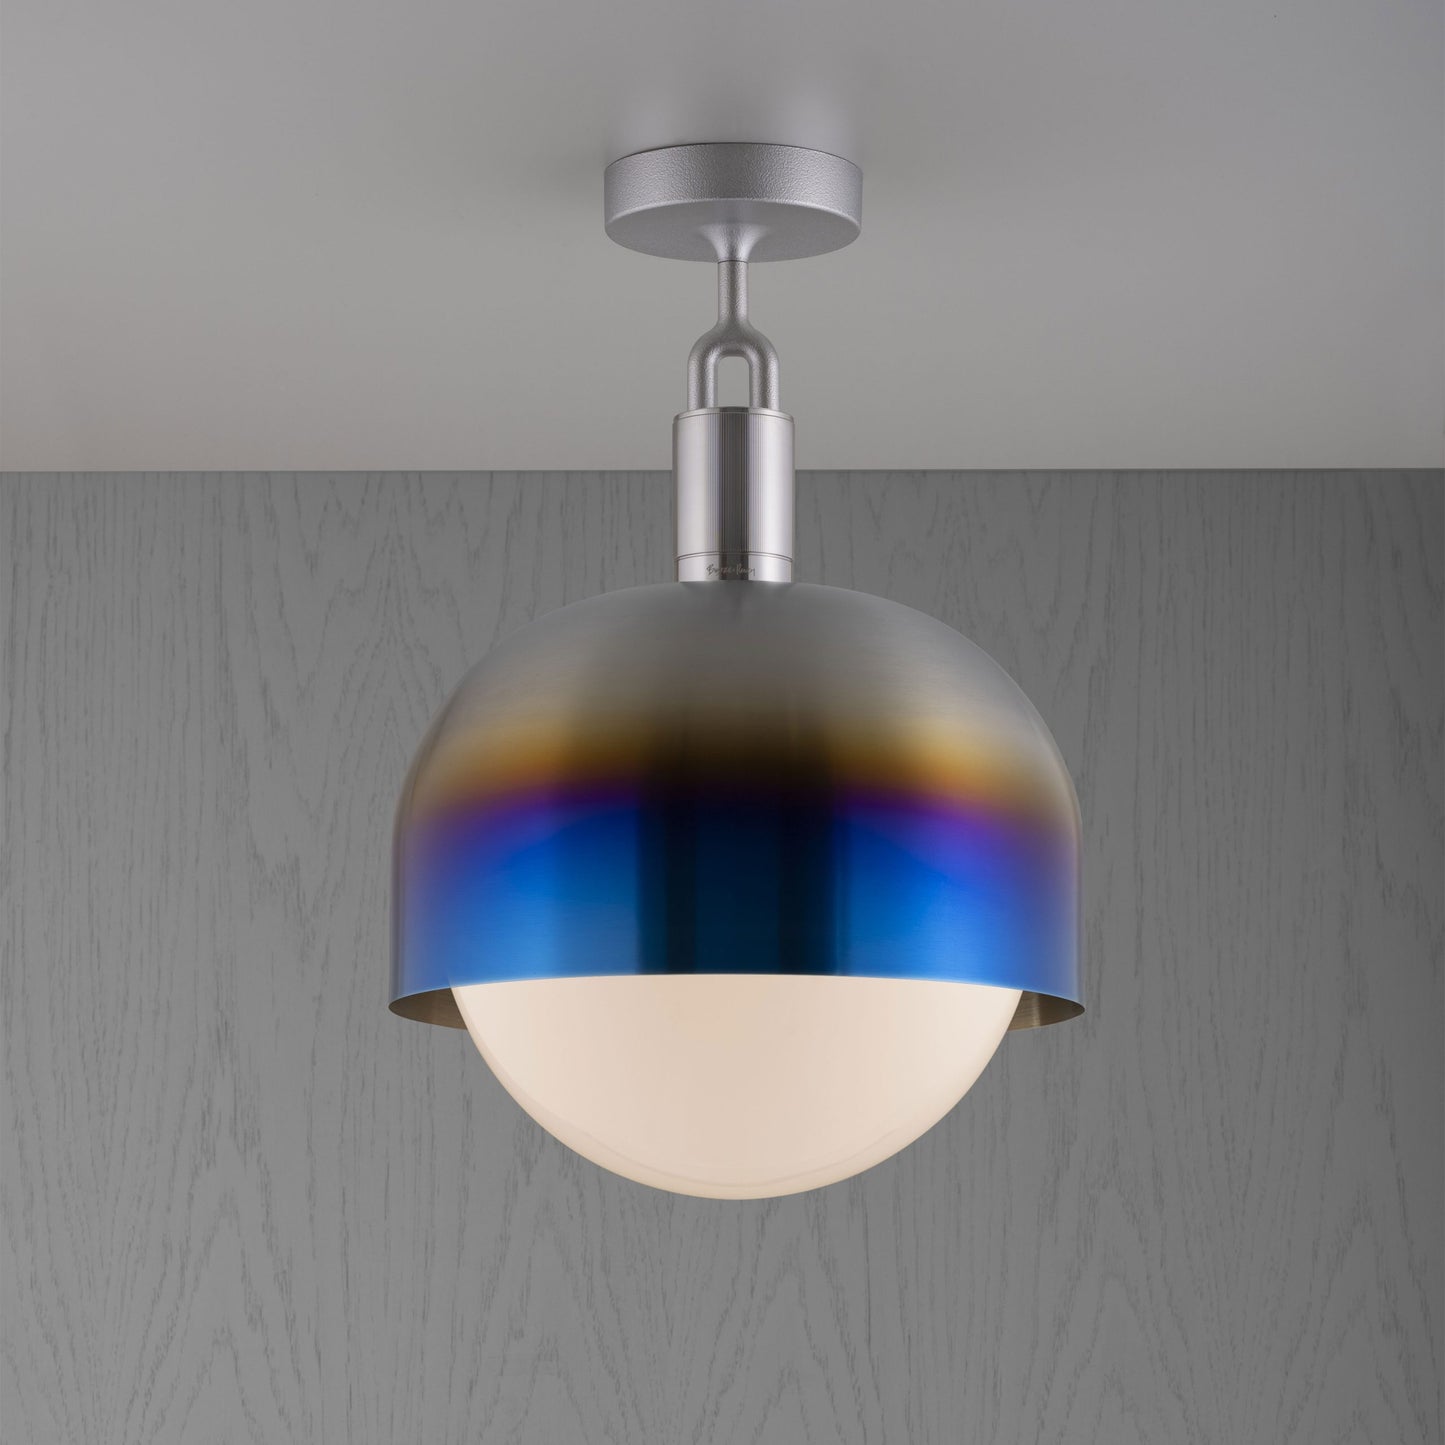 Forked Ceiling Light / Shade / Globe / Opal / Large Burnt Steel, front view.